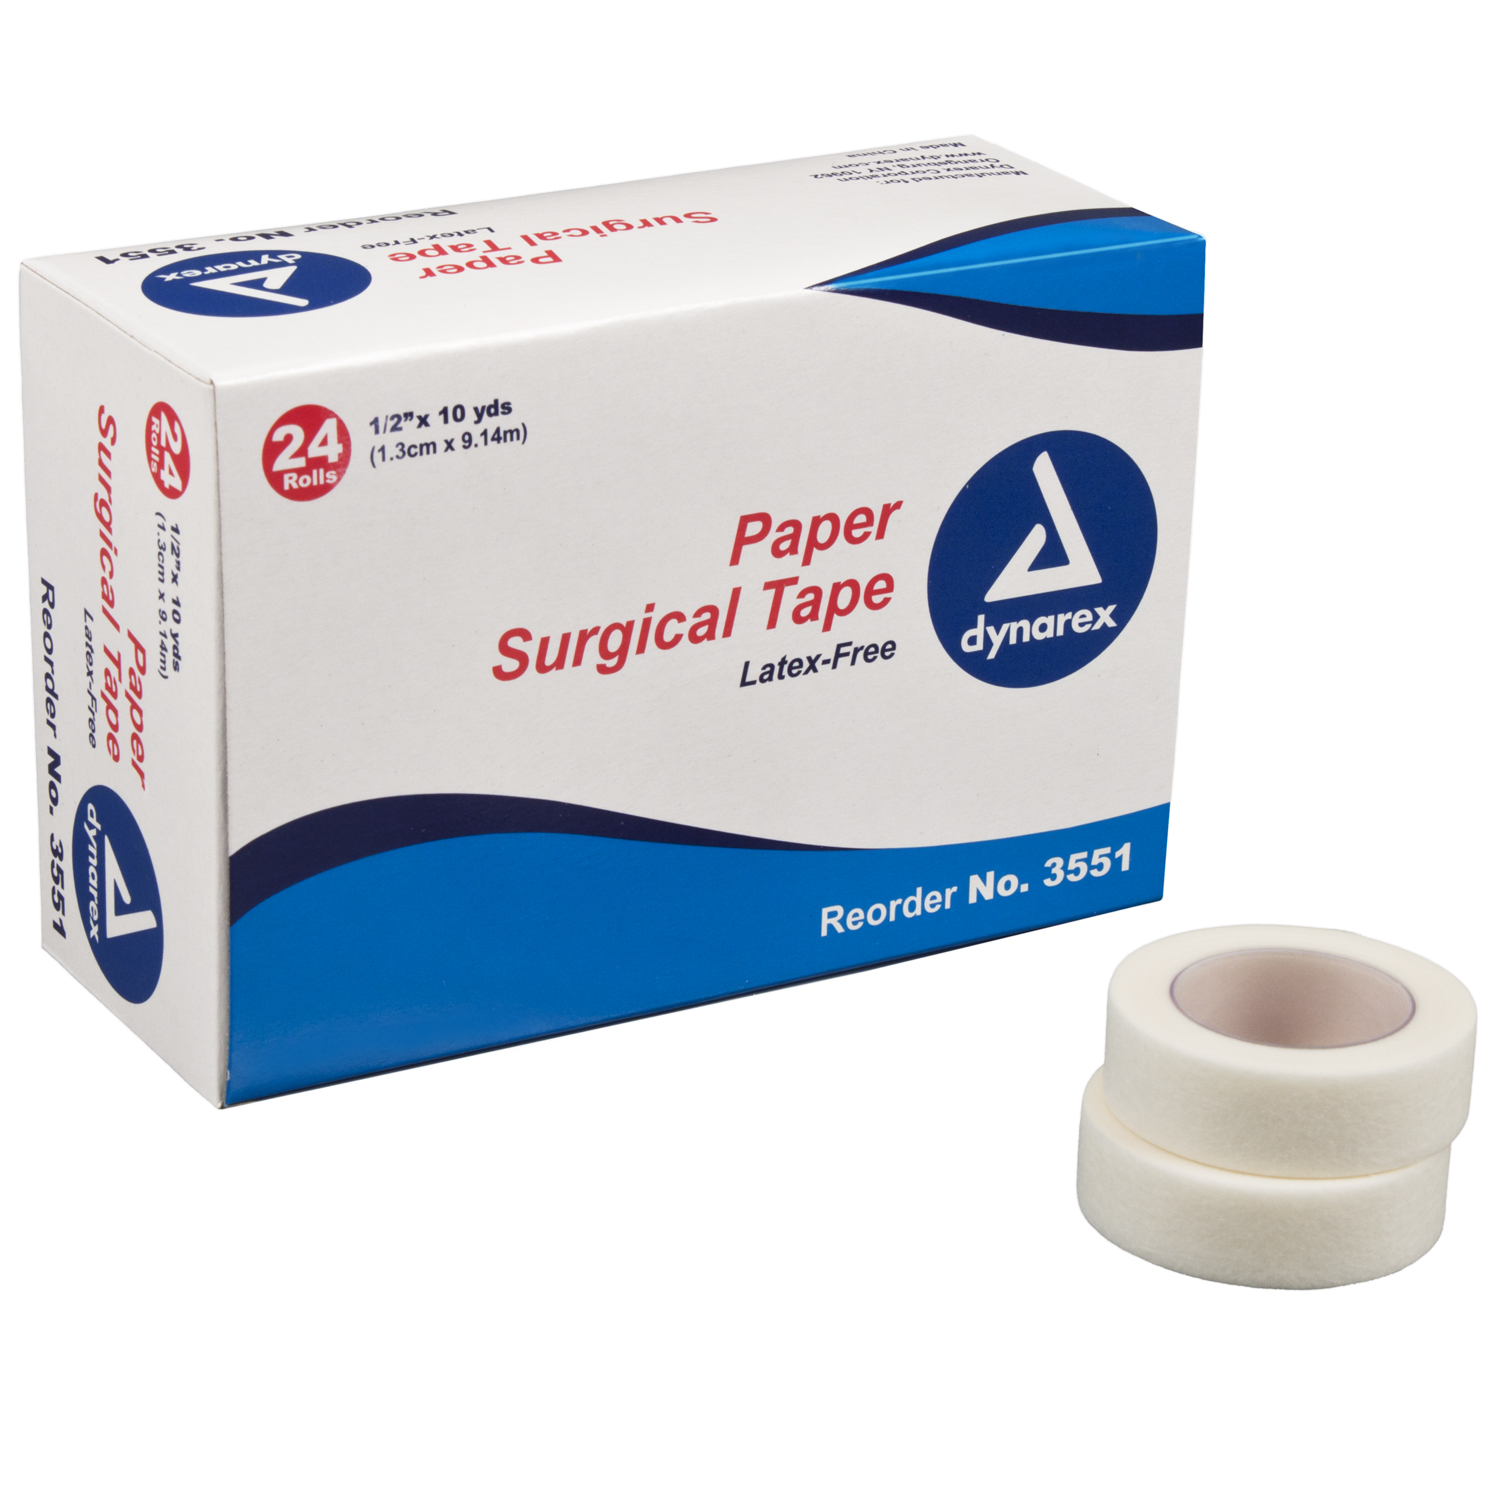 0.5 Inch Paper Surgical Tape: Box of 24 image